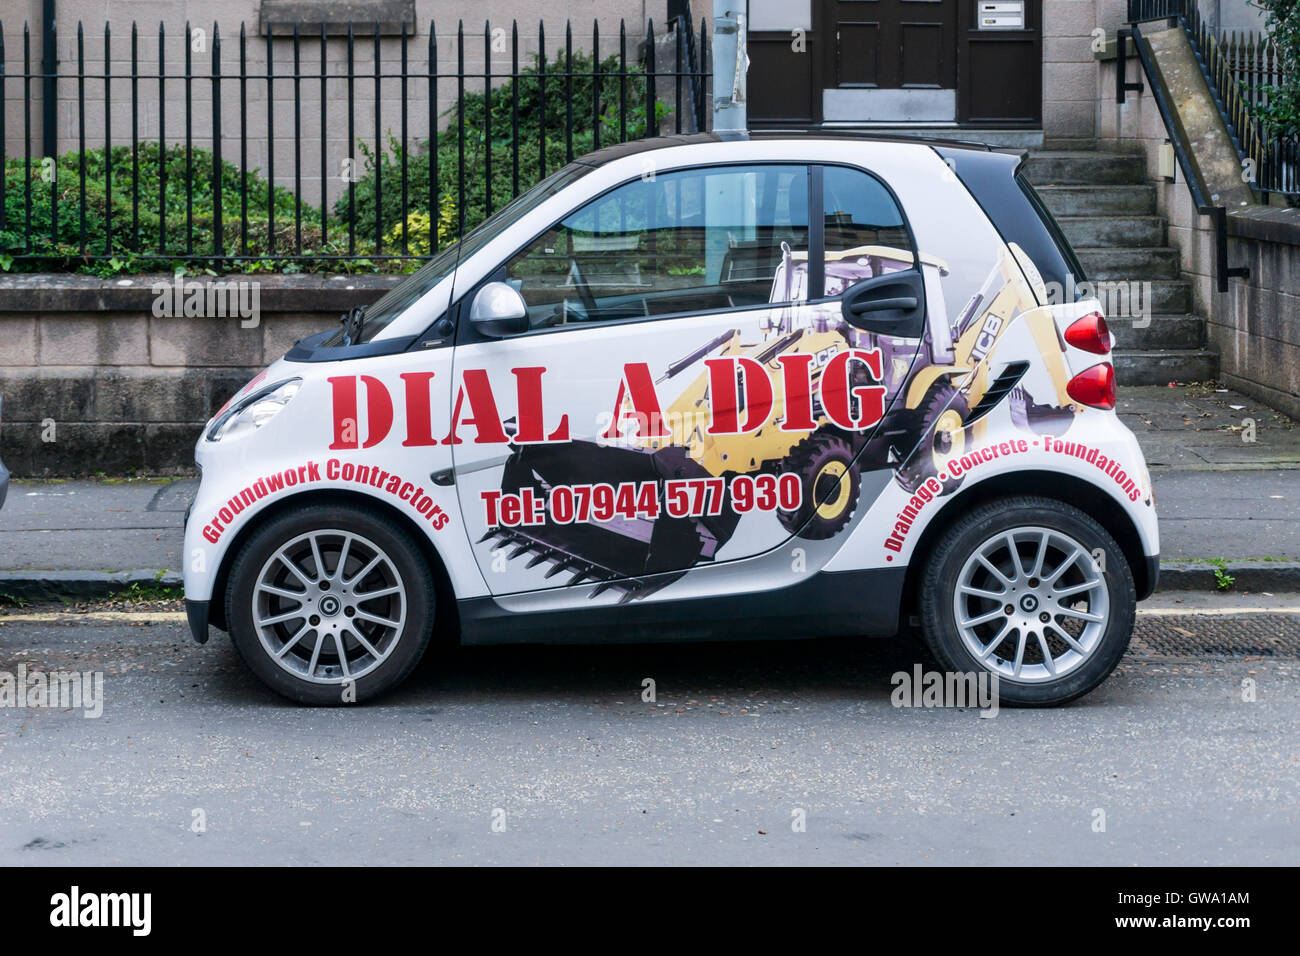 Advert for Dial a Dig groundwork contractors on the side of a Smart Fortwo car. Stock Photo